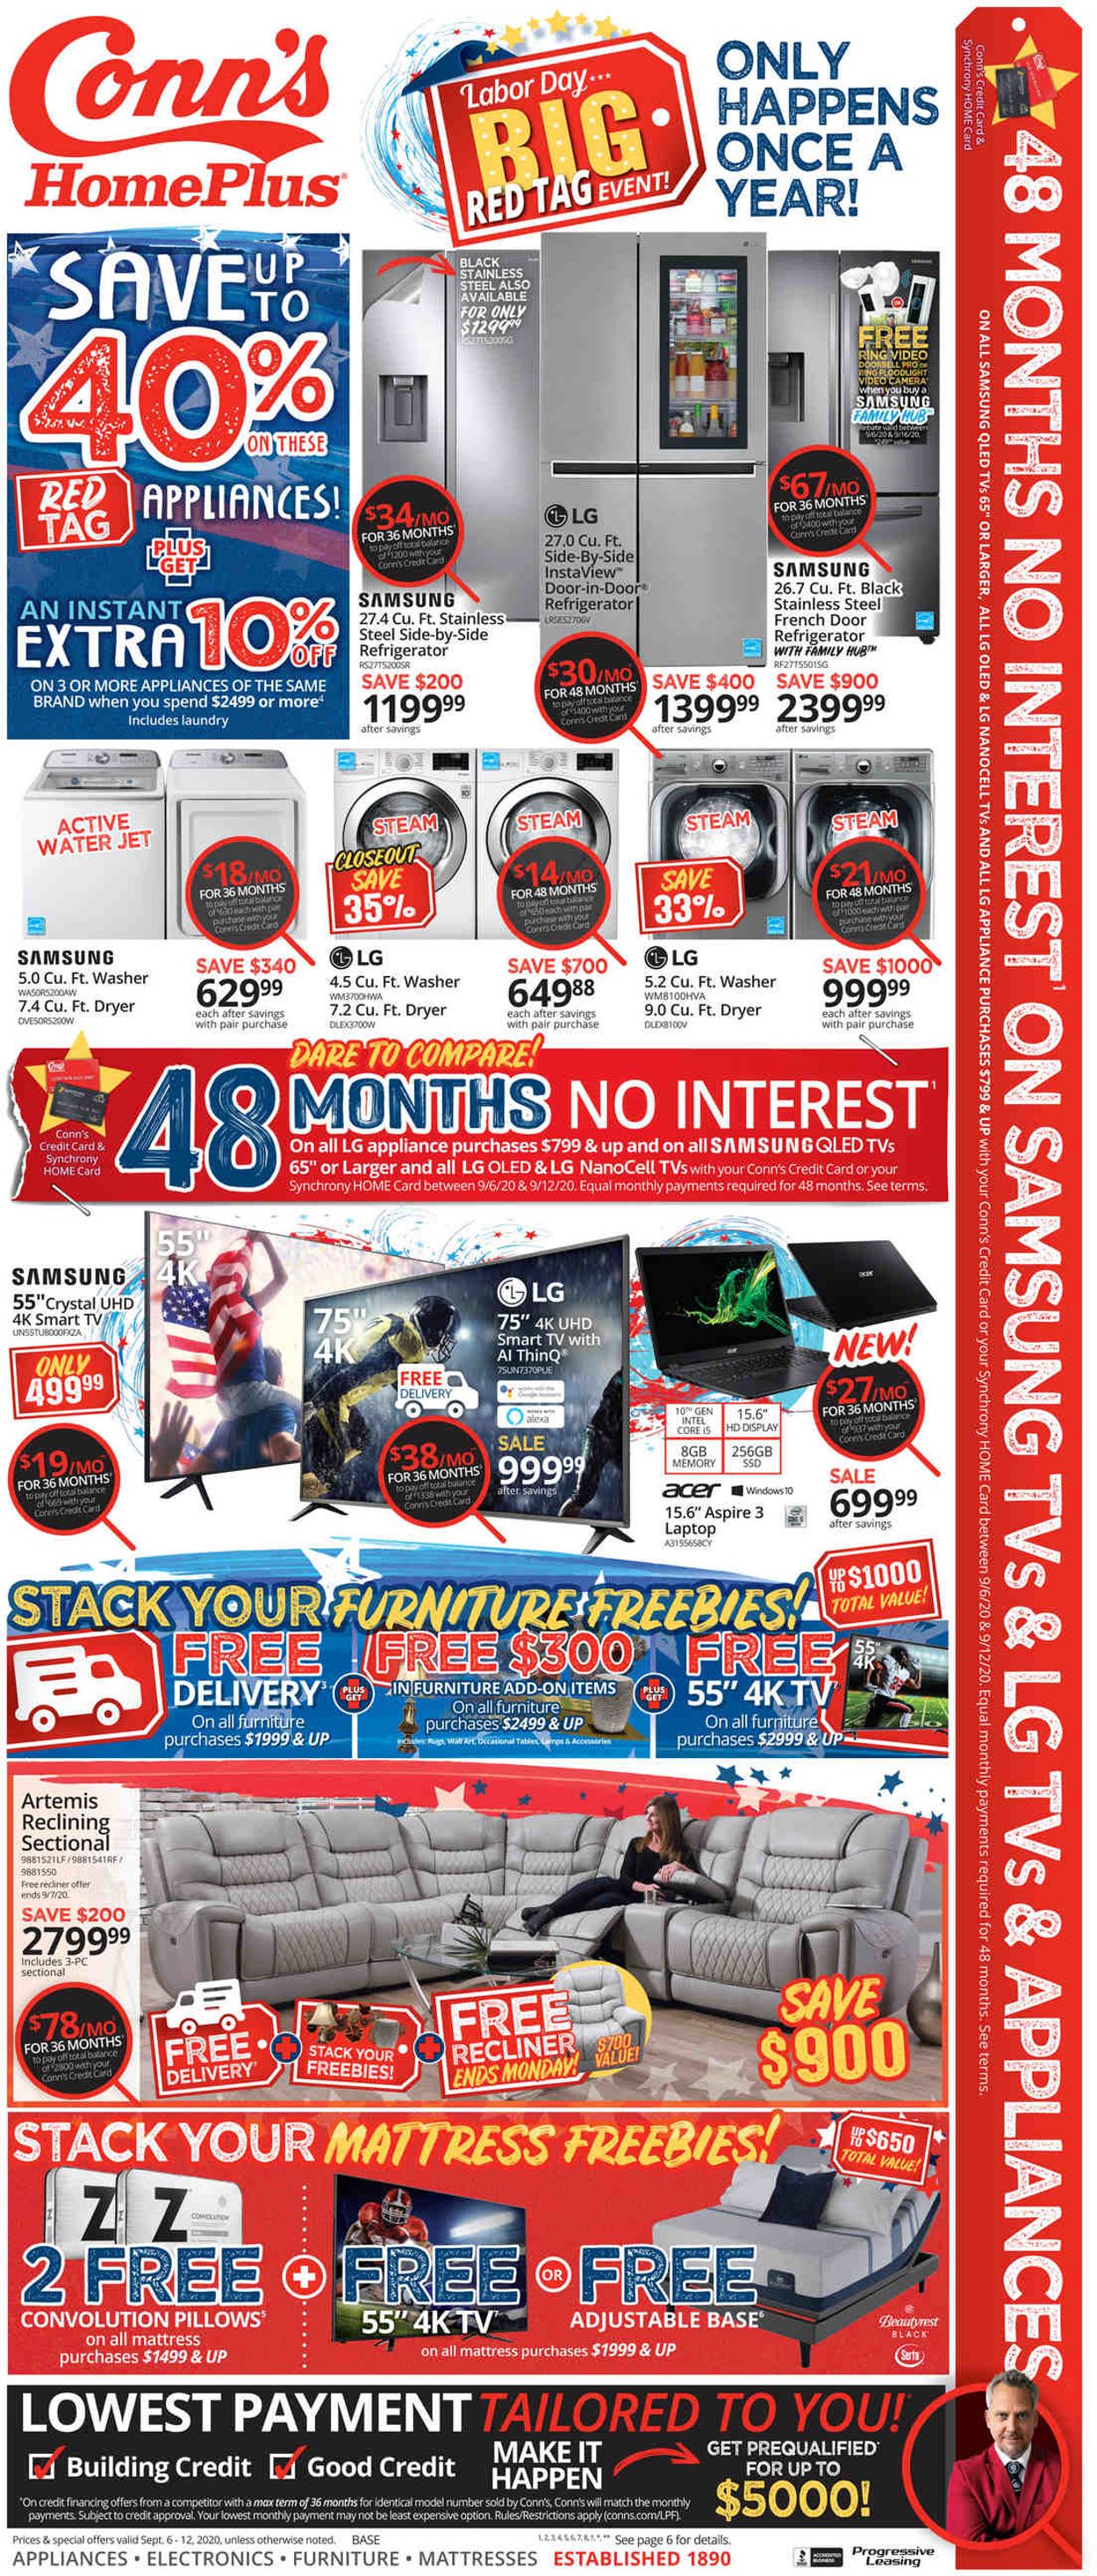 Conn's Home Plus Weekly Ad Circular - valid 09/06-09/12/2020